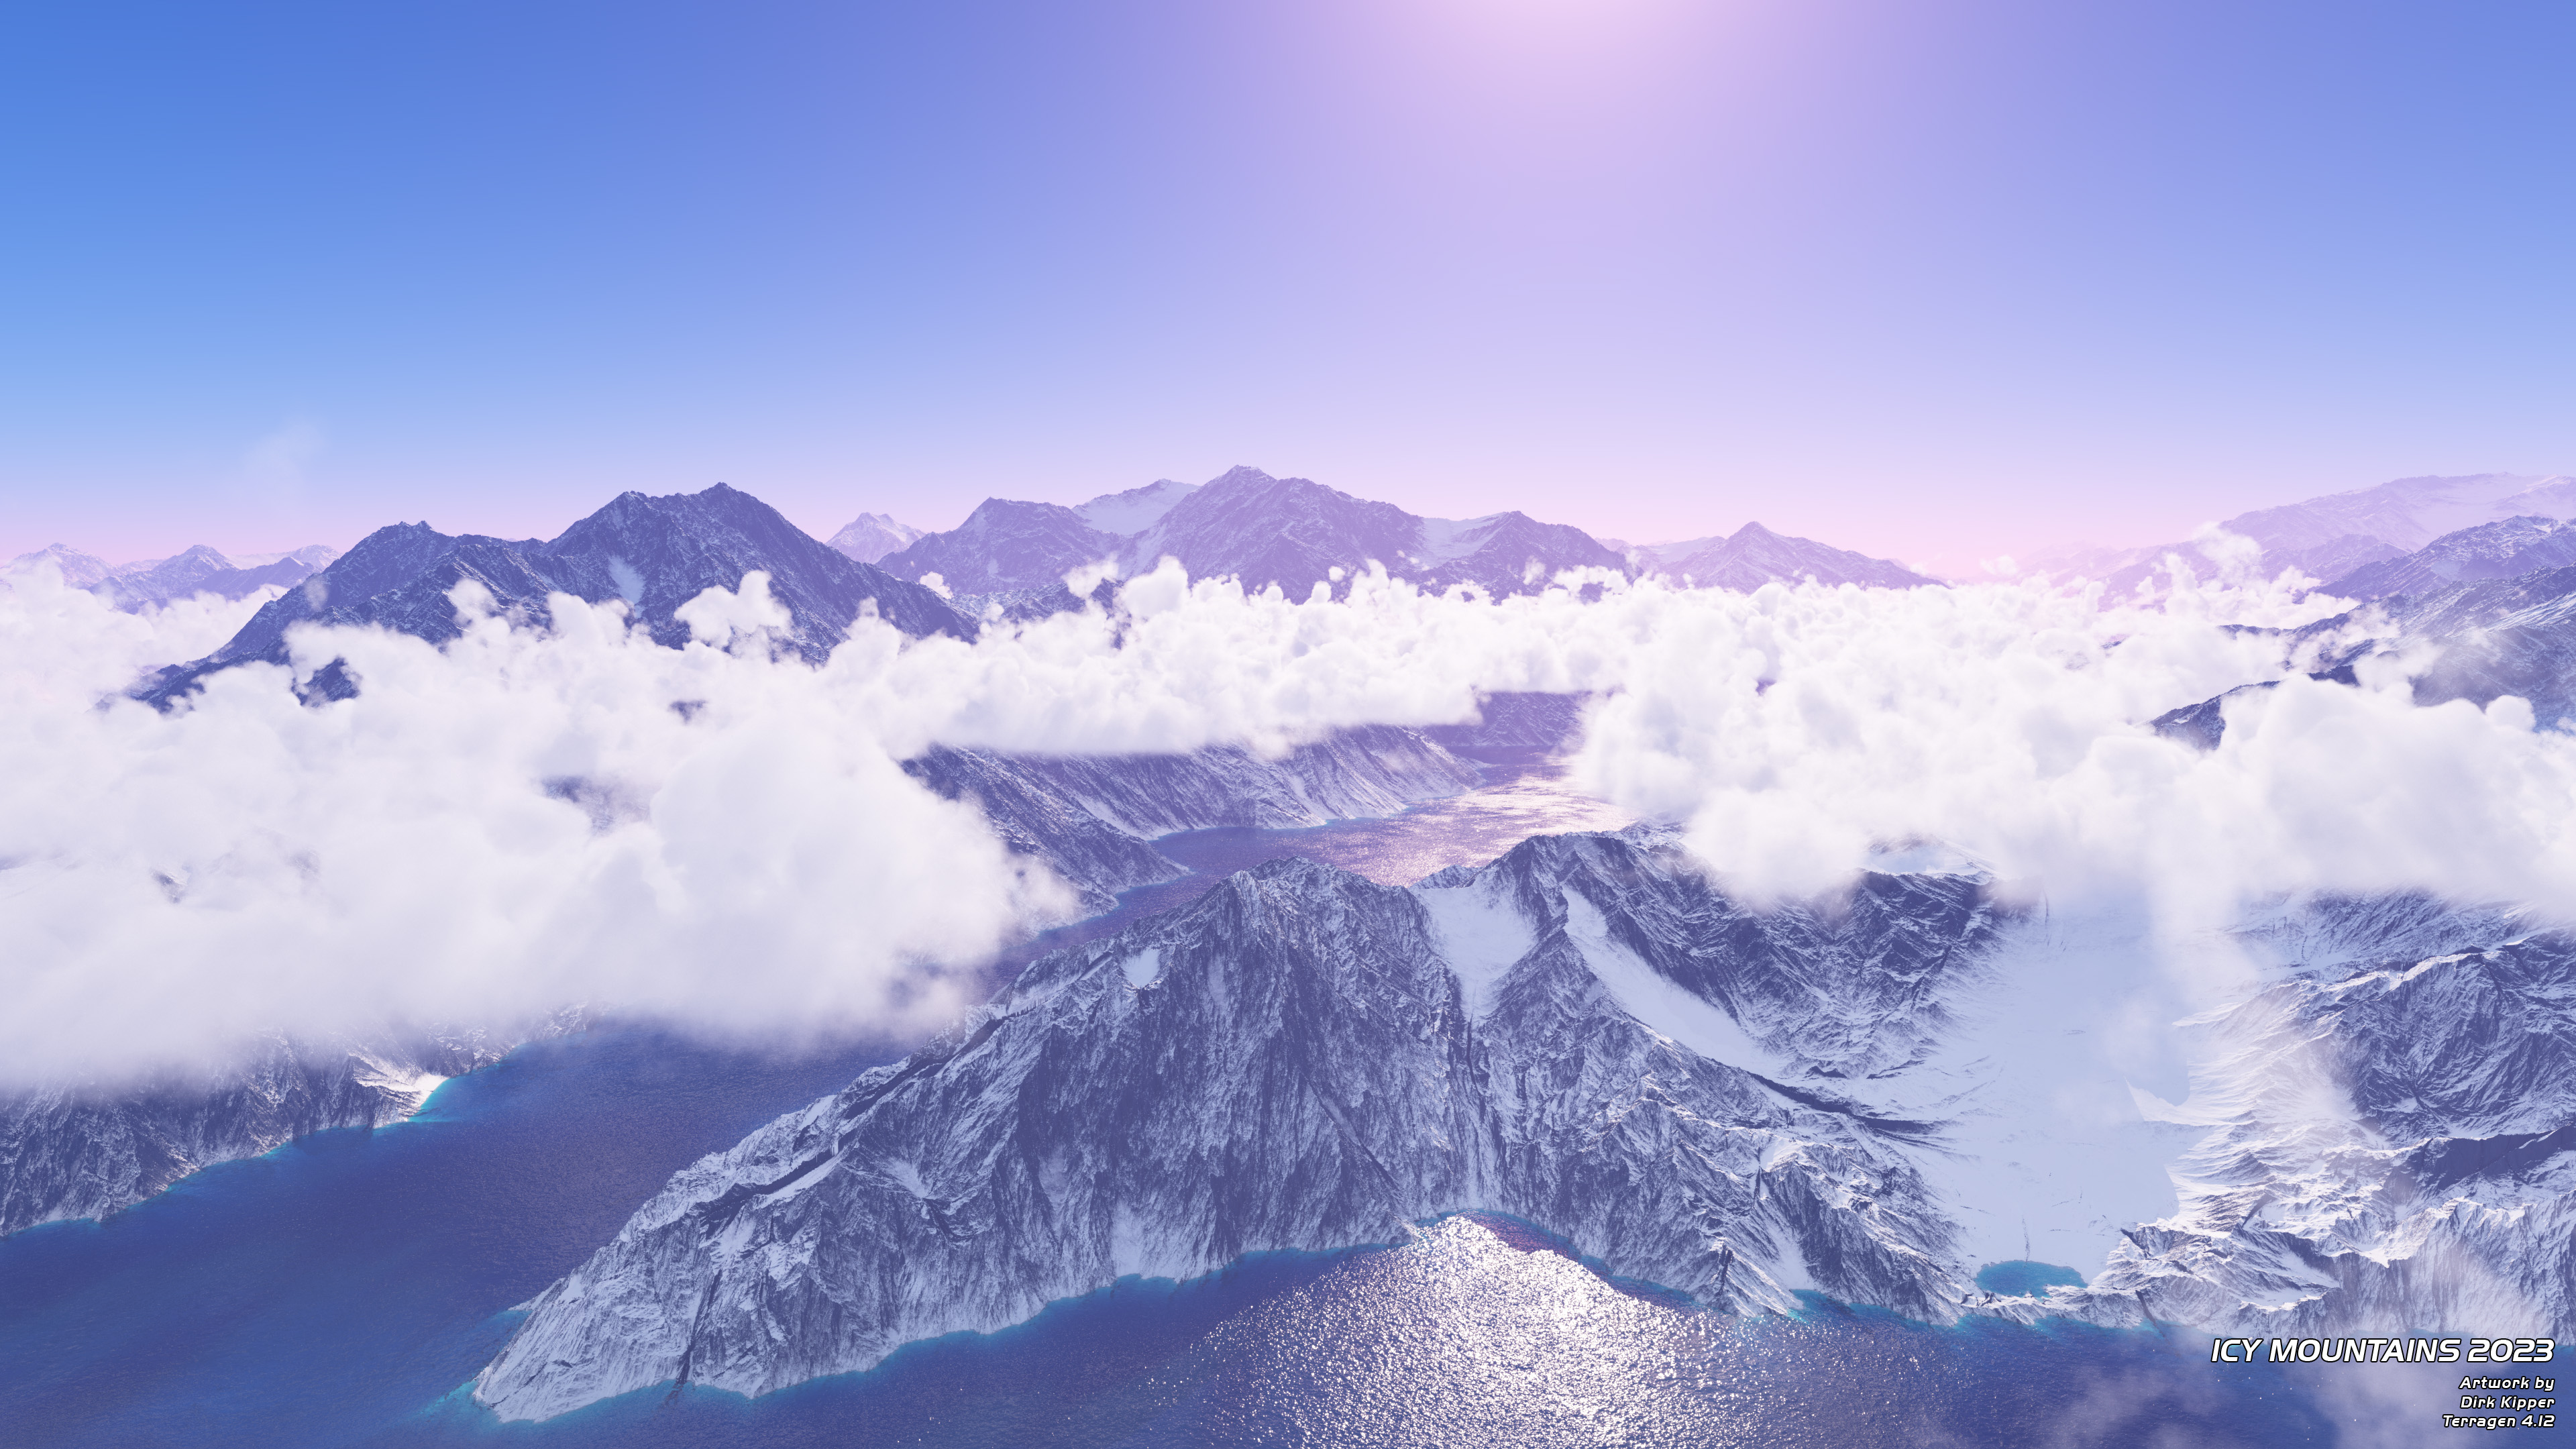 Over the Clouds - Icy Mountain Sunset.jpg